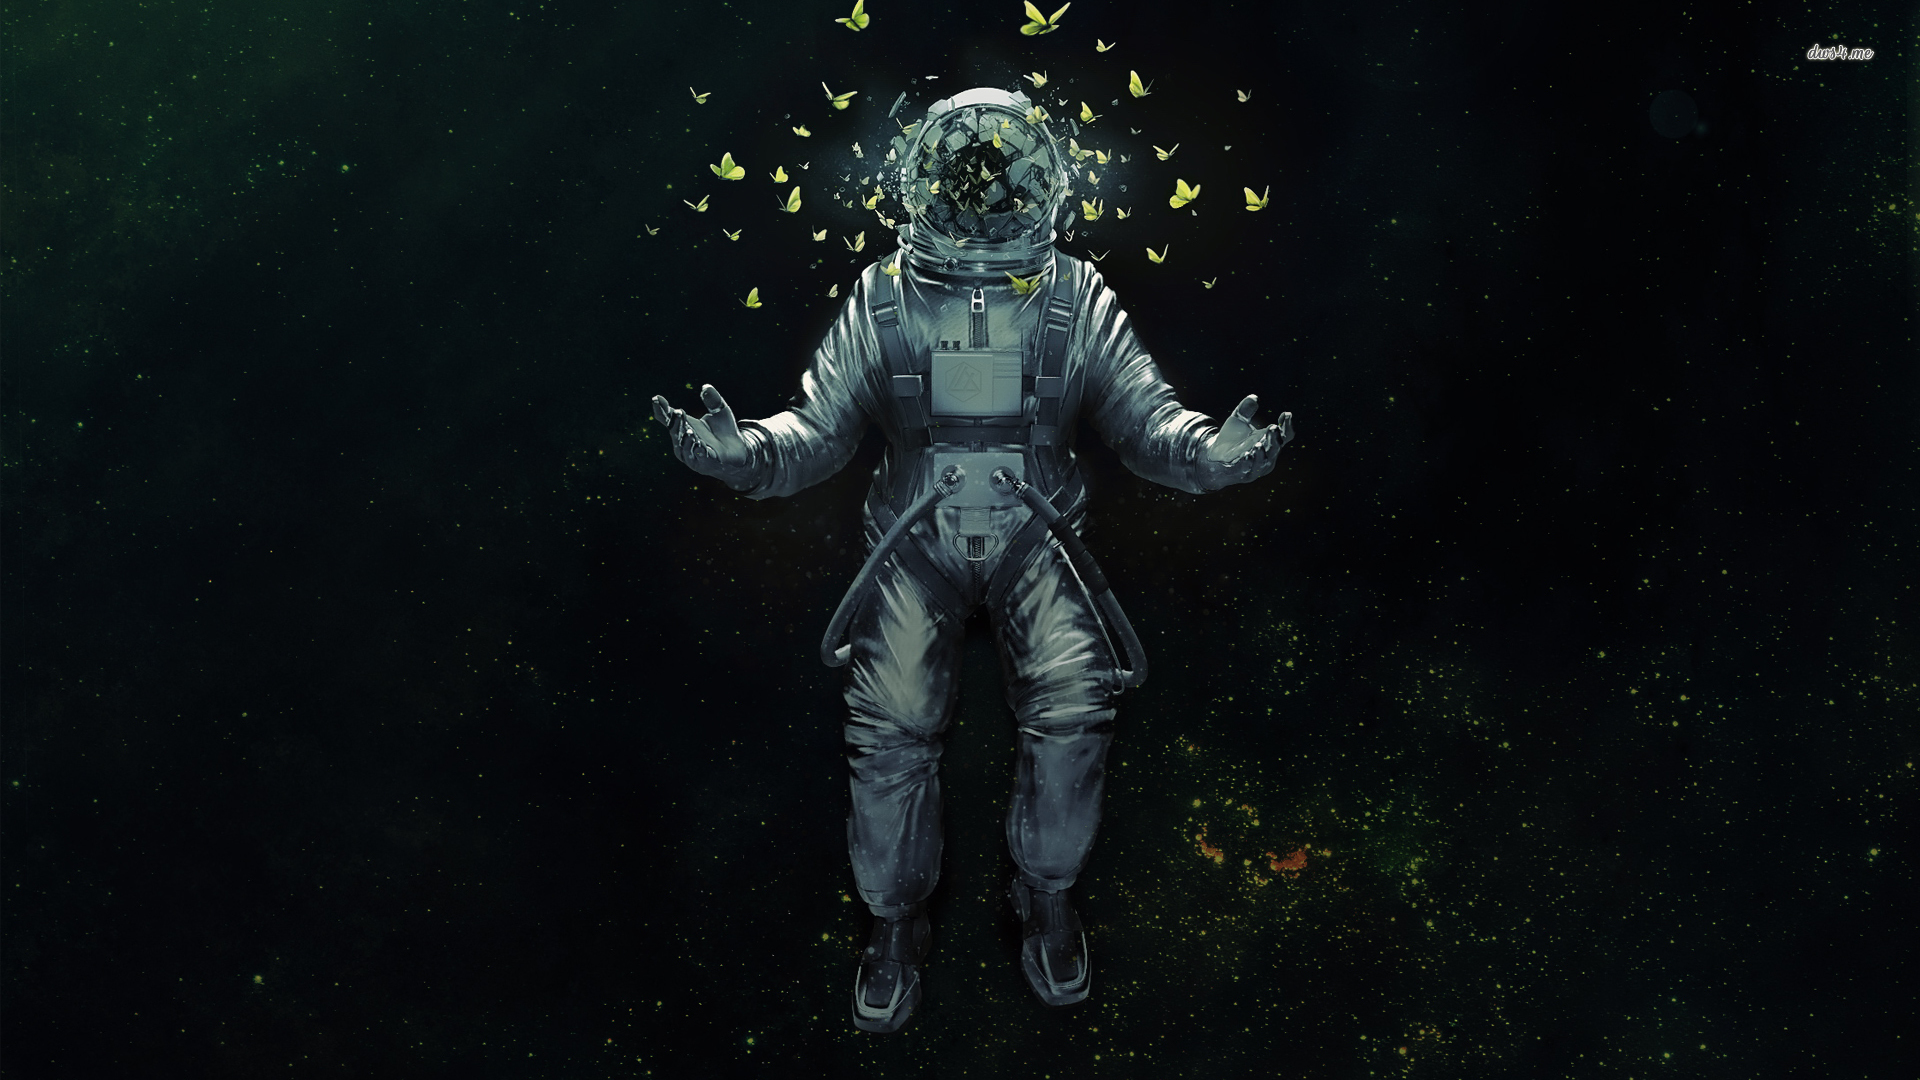 Astronaut playing with butterflies in space wallpaper - Fantasy ...